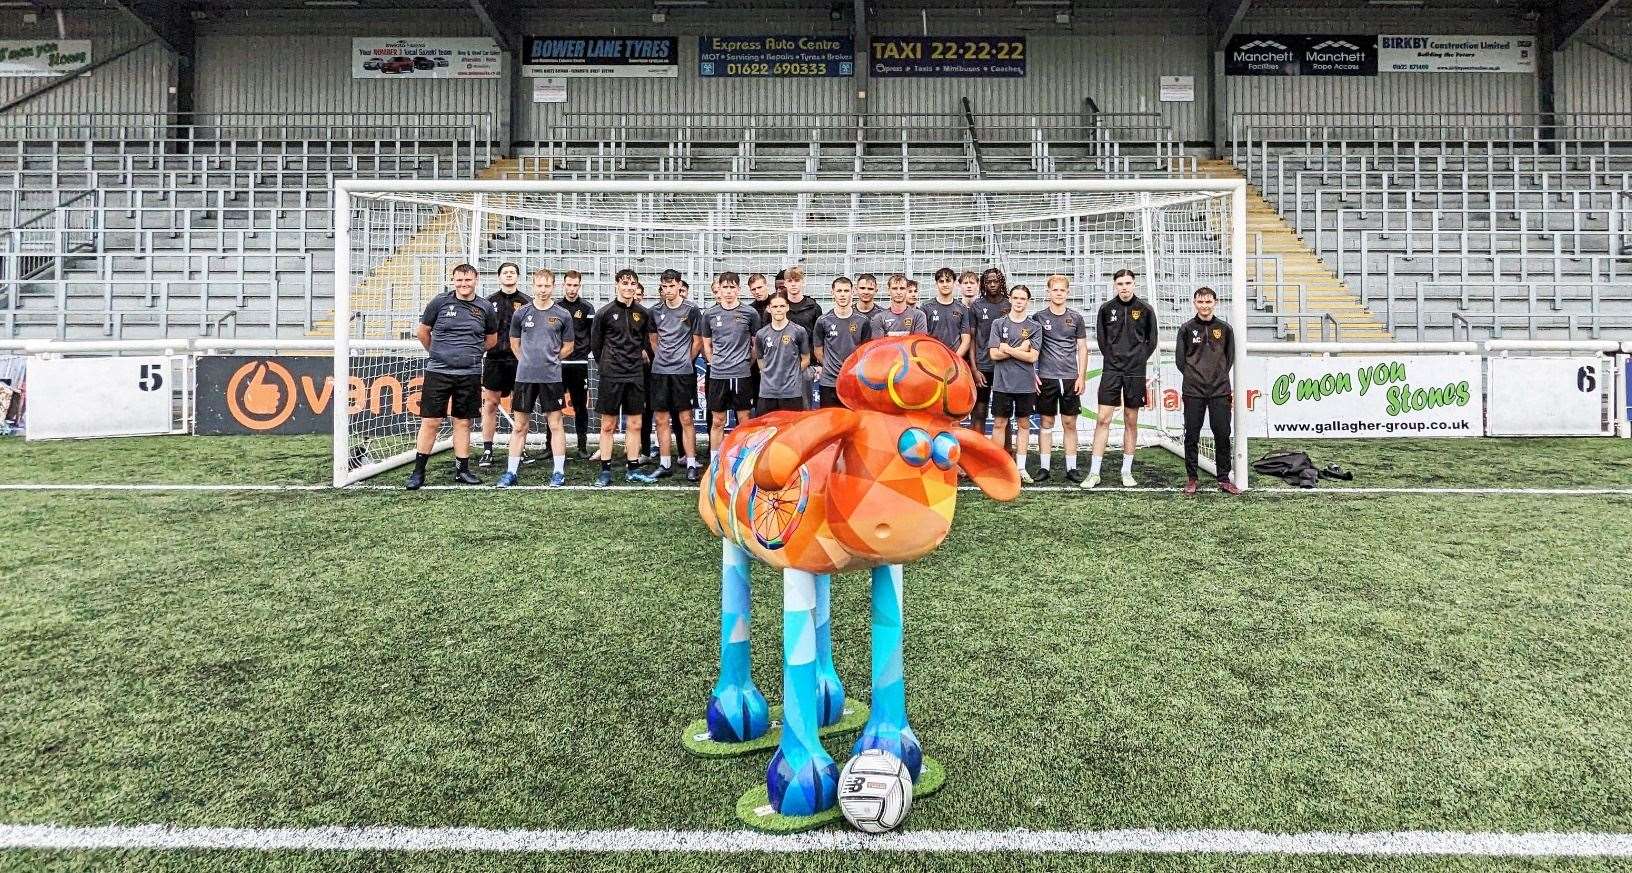 The Olympic-themed Shaun the Sheep sculpture at Maidstone United’s Gallagher Stadium. Picture: Supplied by Pennington PR